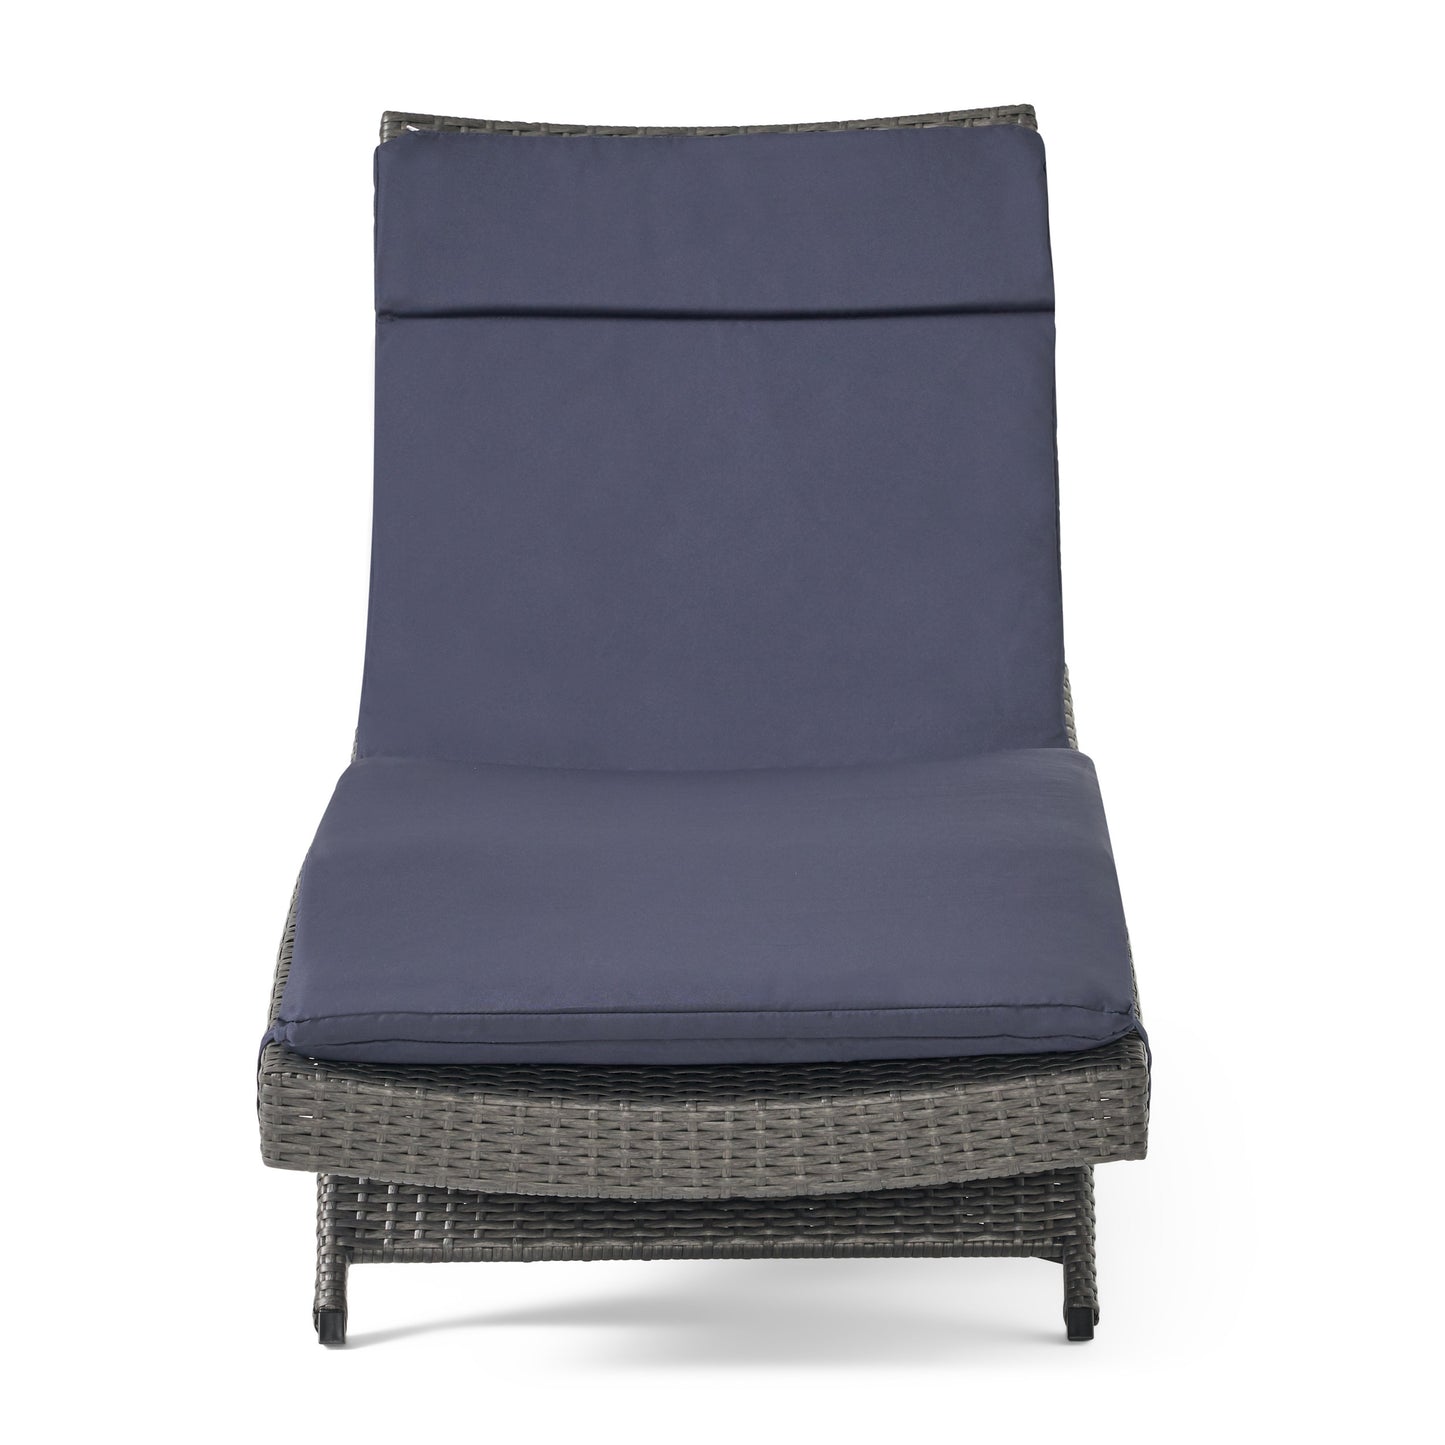 Nassau Outdoor Grey Wicker Adjustable Chaise Lounge with Cushion